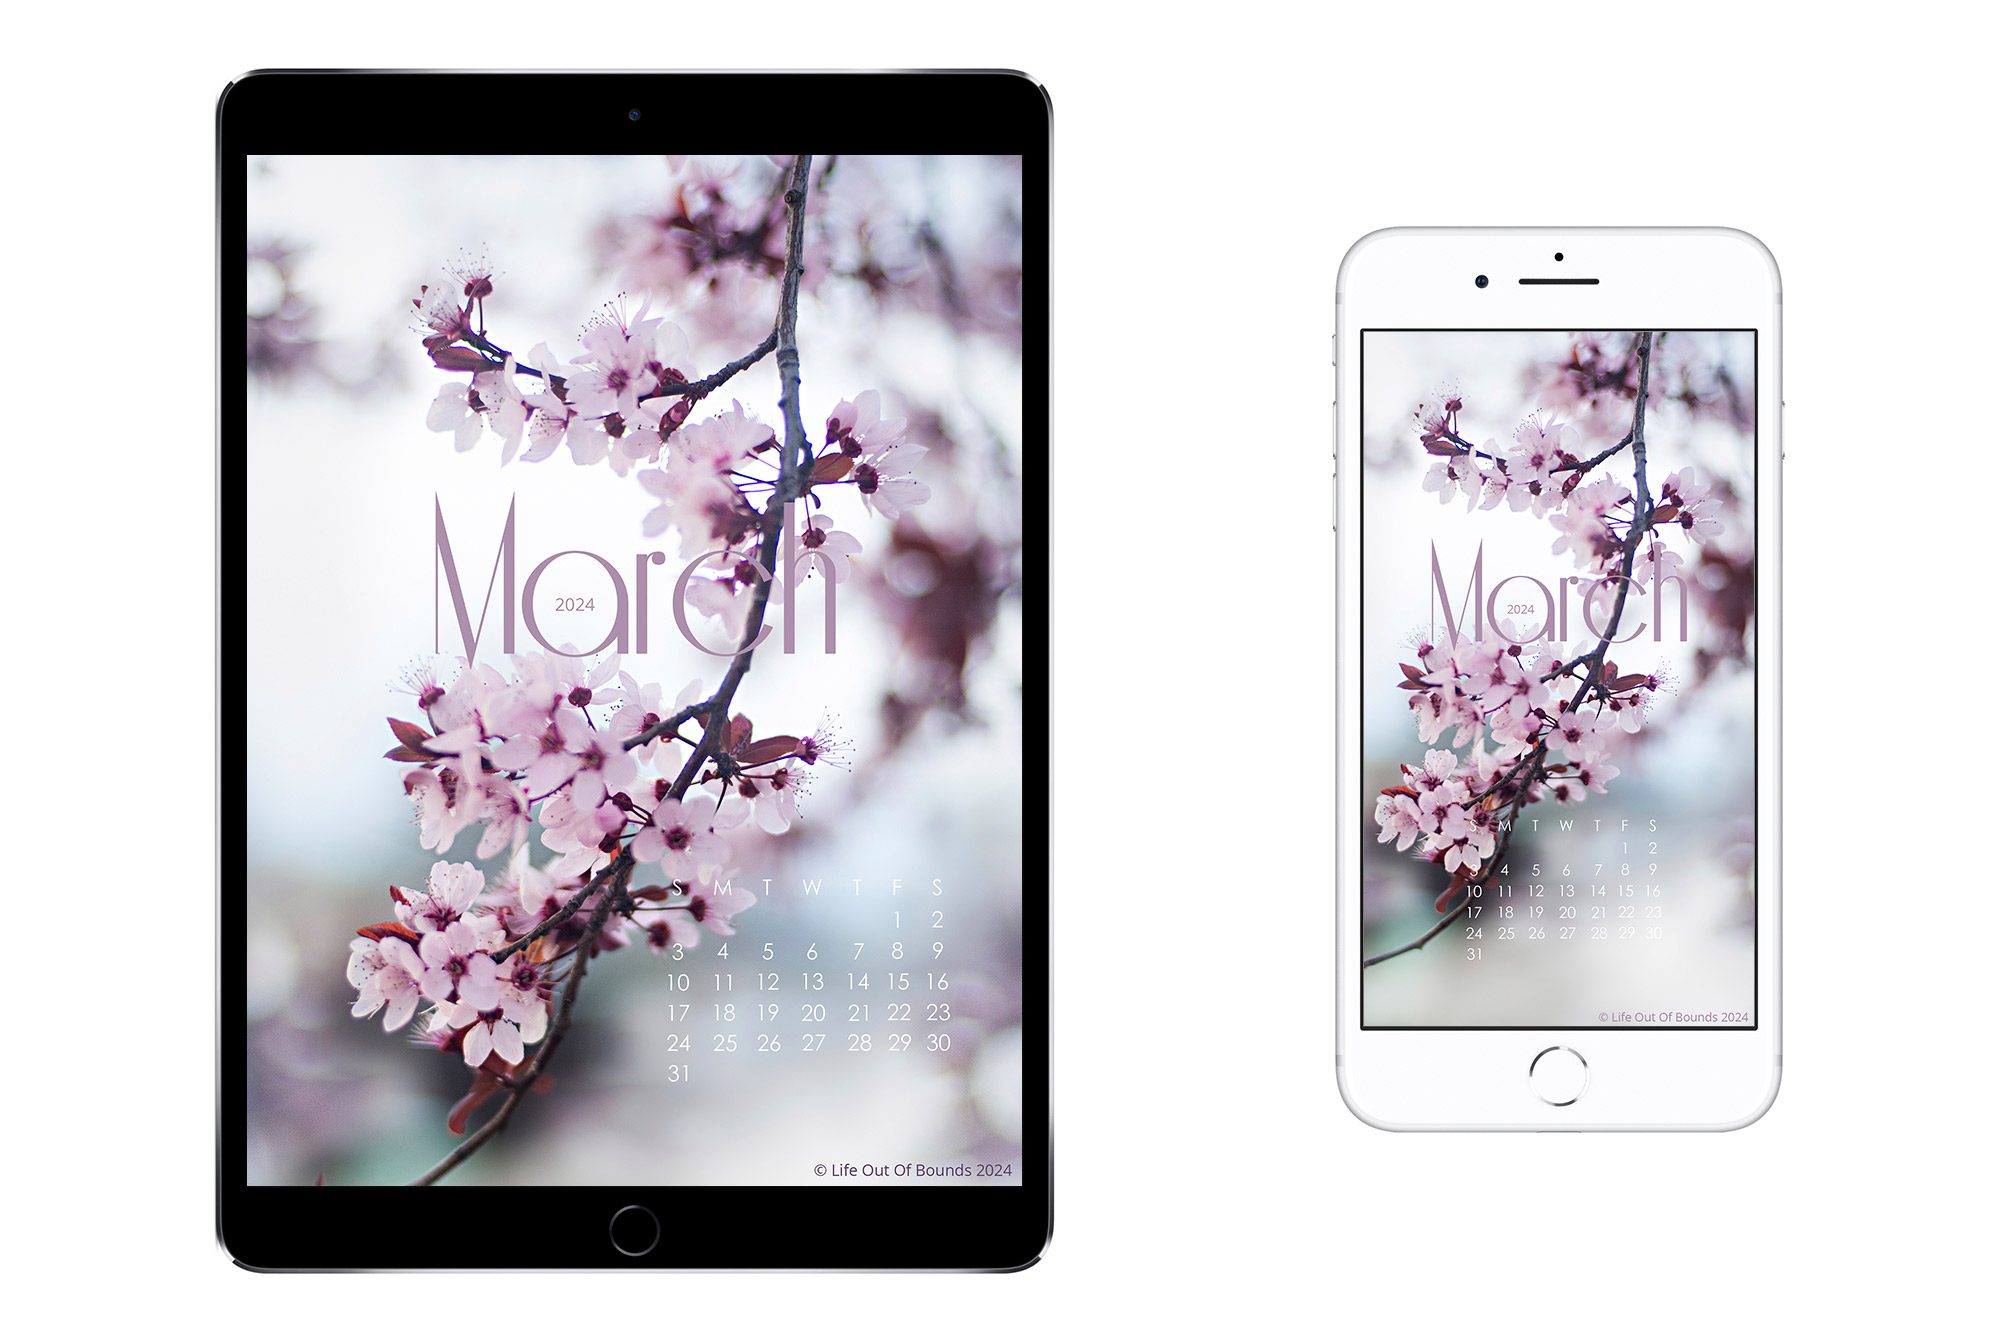 March-23-free-calendar-wallpaper-for-iPad-and-tablet-iPhone-and-smartphone